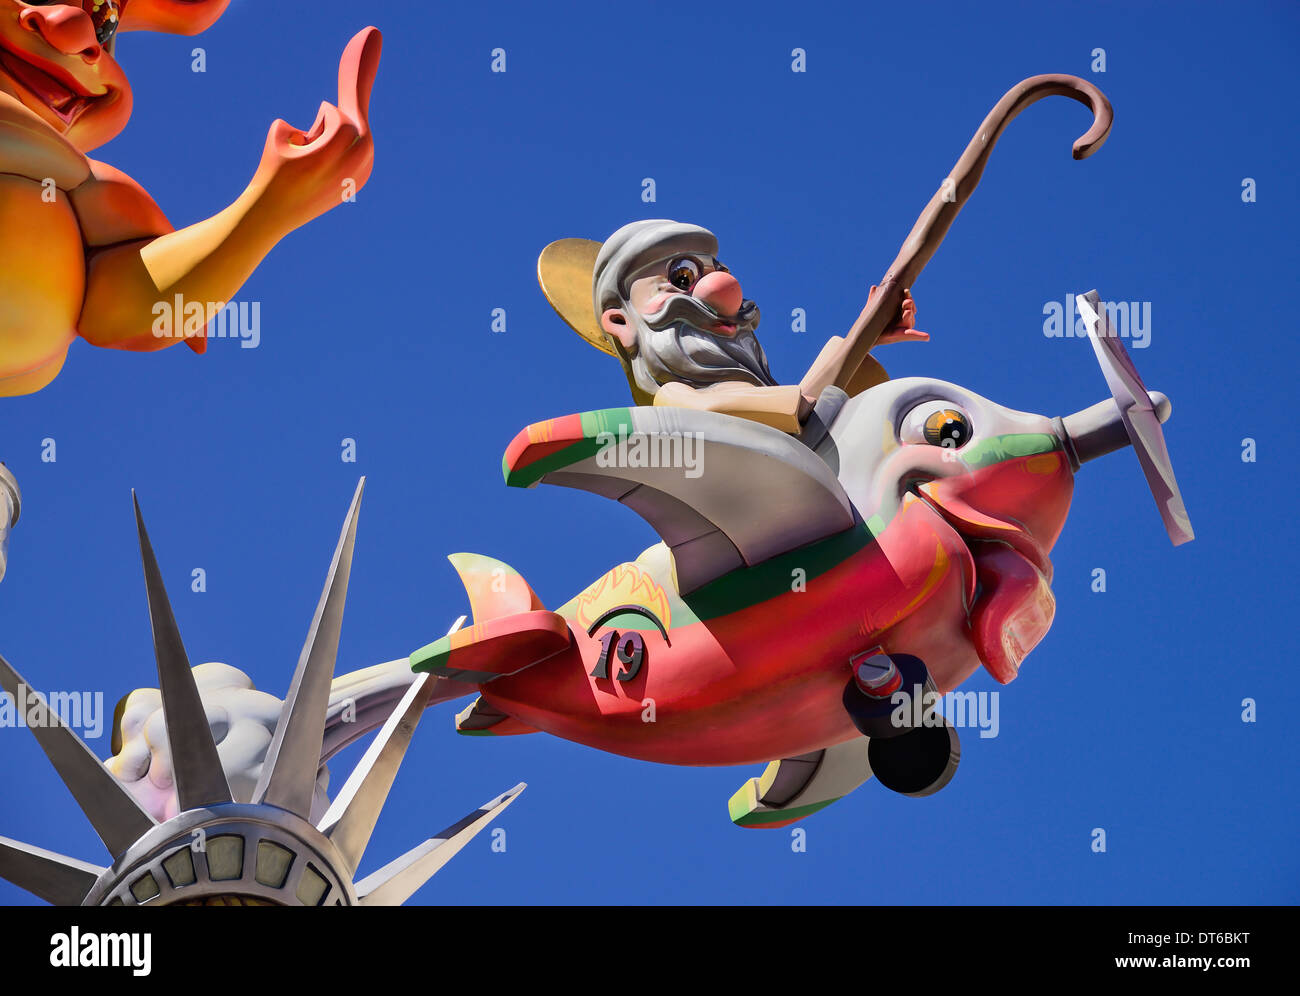 Spain, Valencia Province, Valencia, Papier Mache figure flying an airplane resembling a fish during Las Fallas festival. Stock Photo